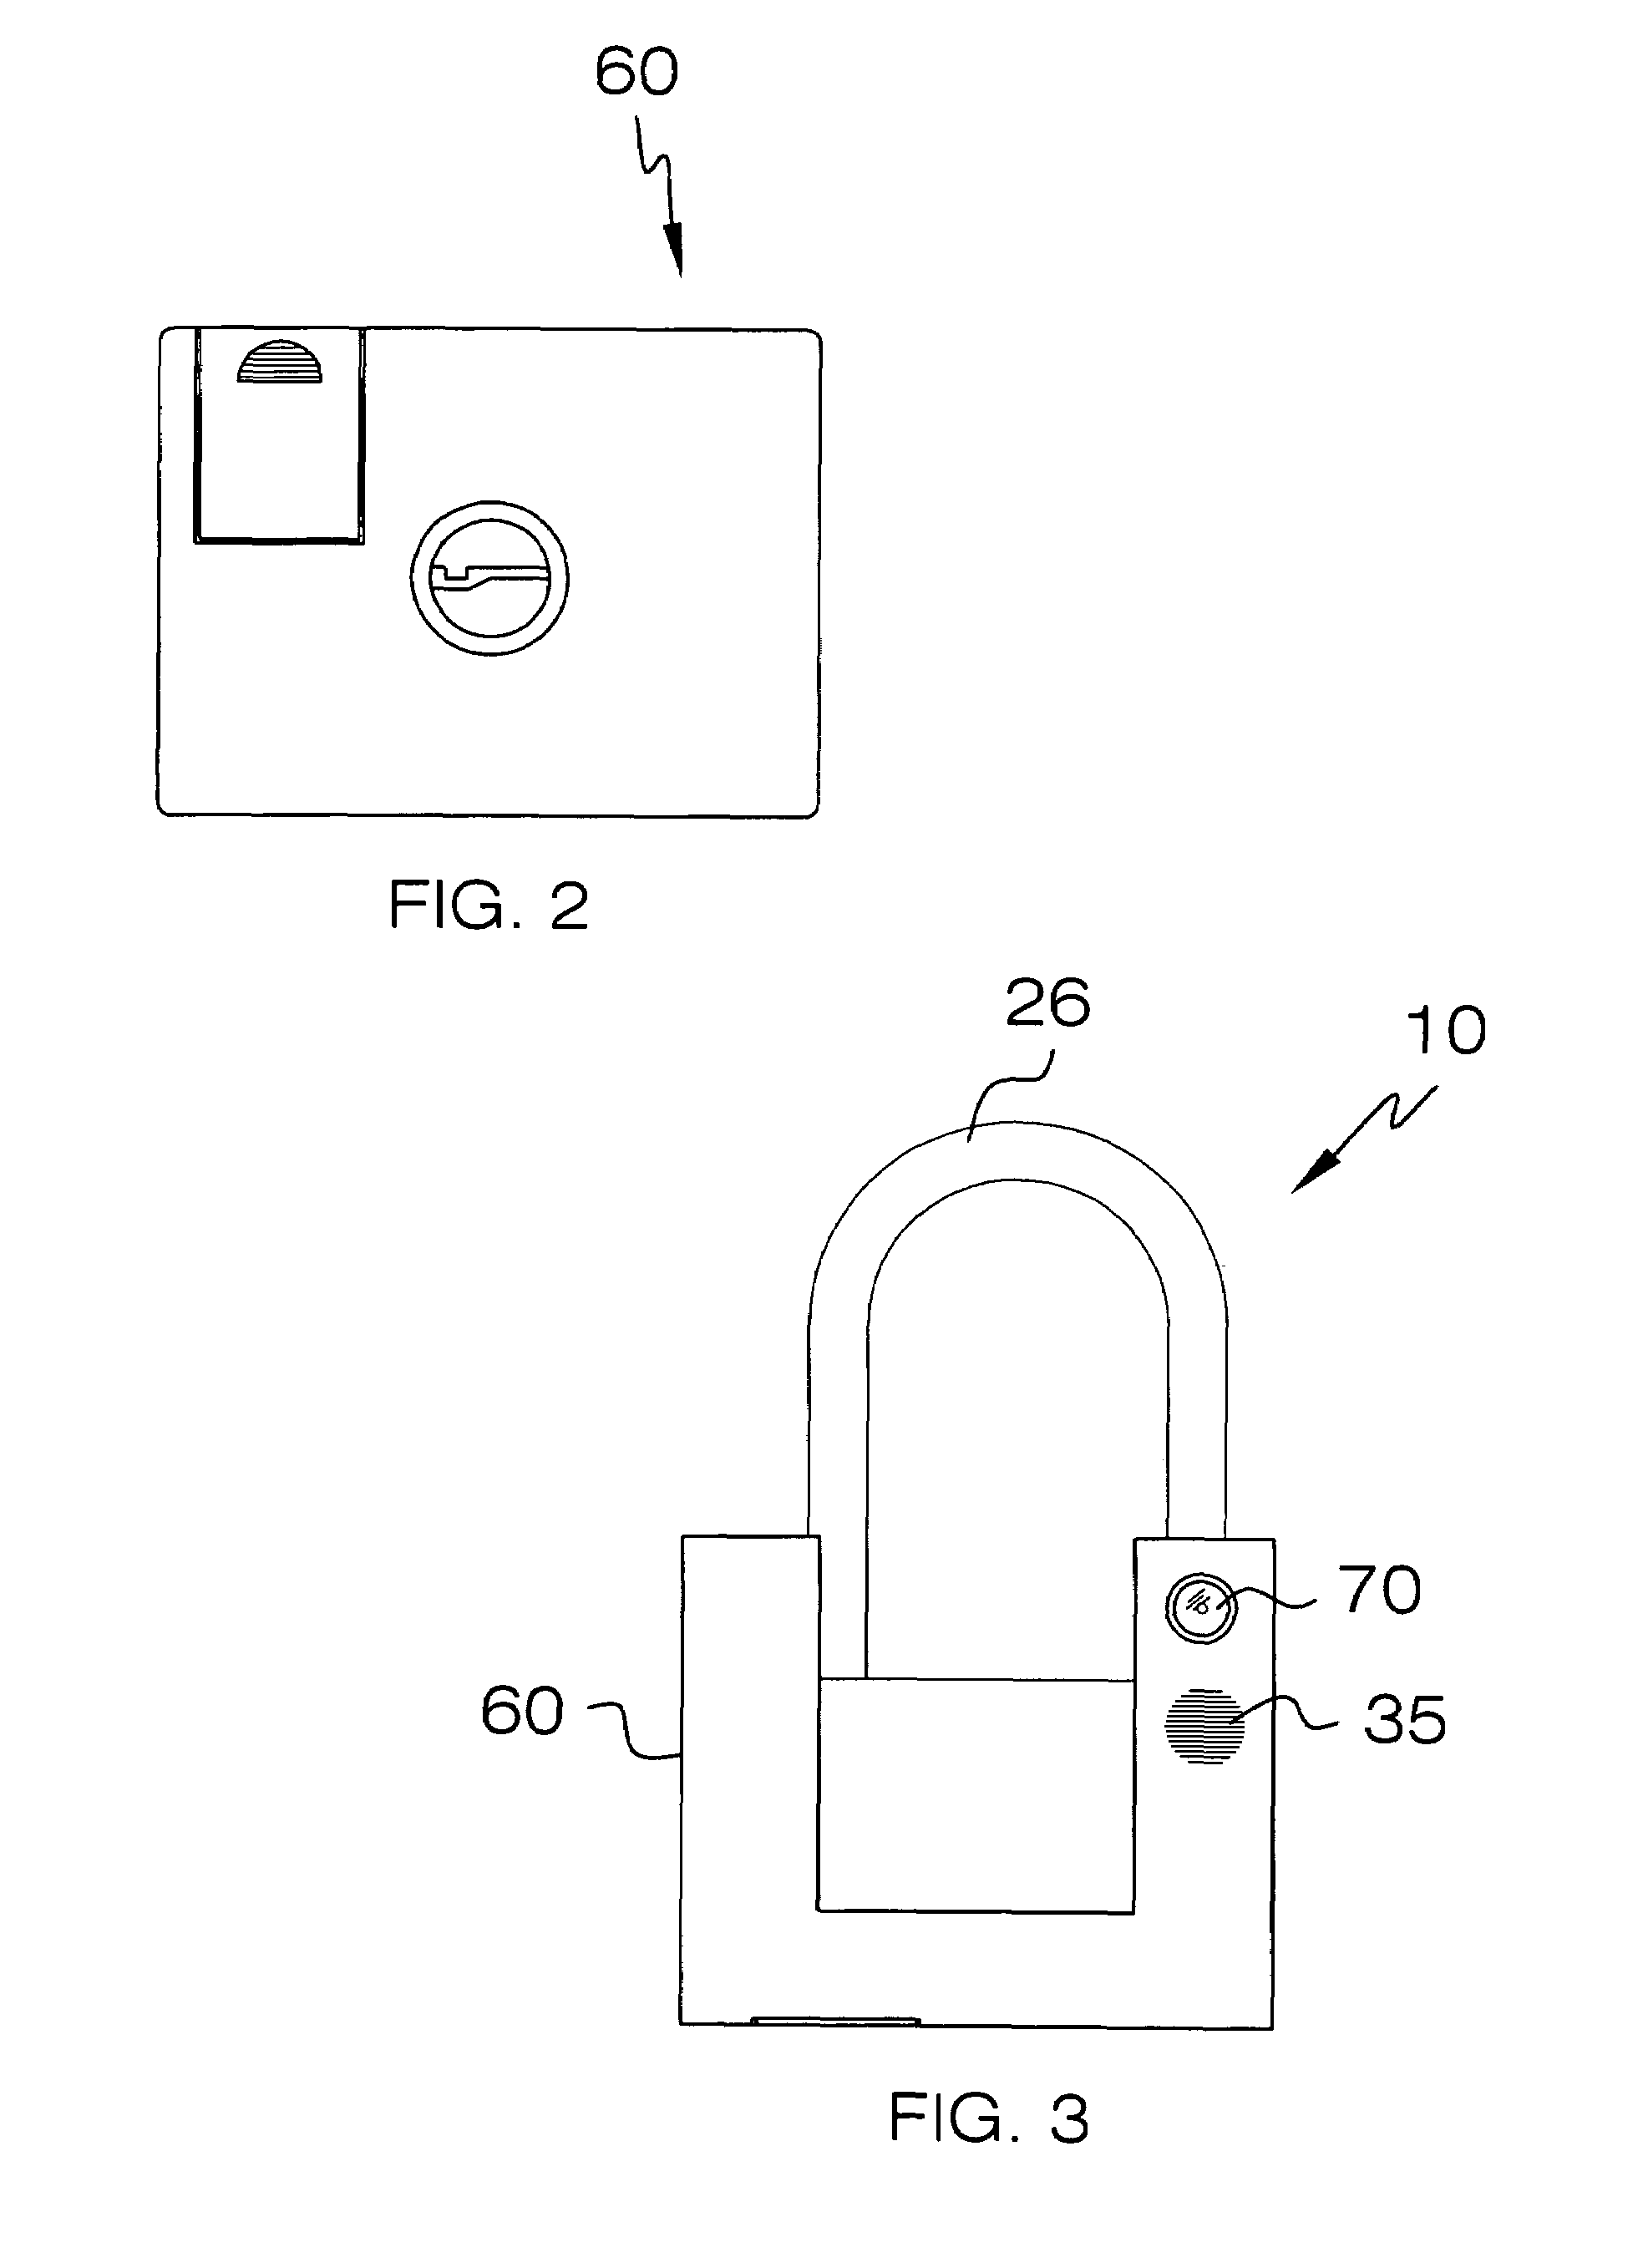 Combined padlock housing and acoustic notification device